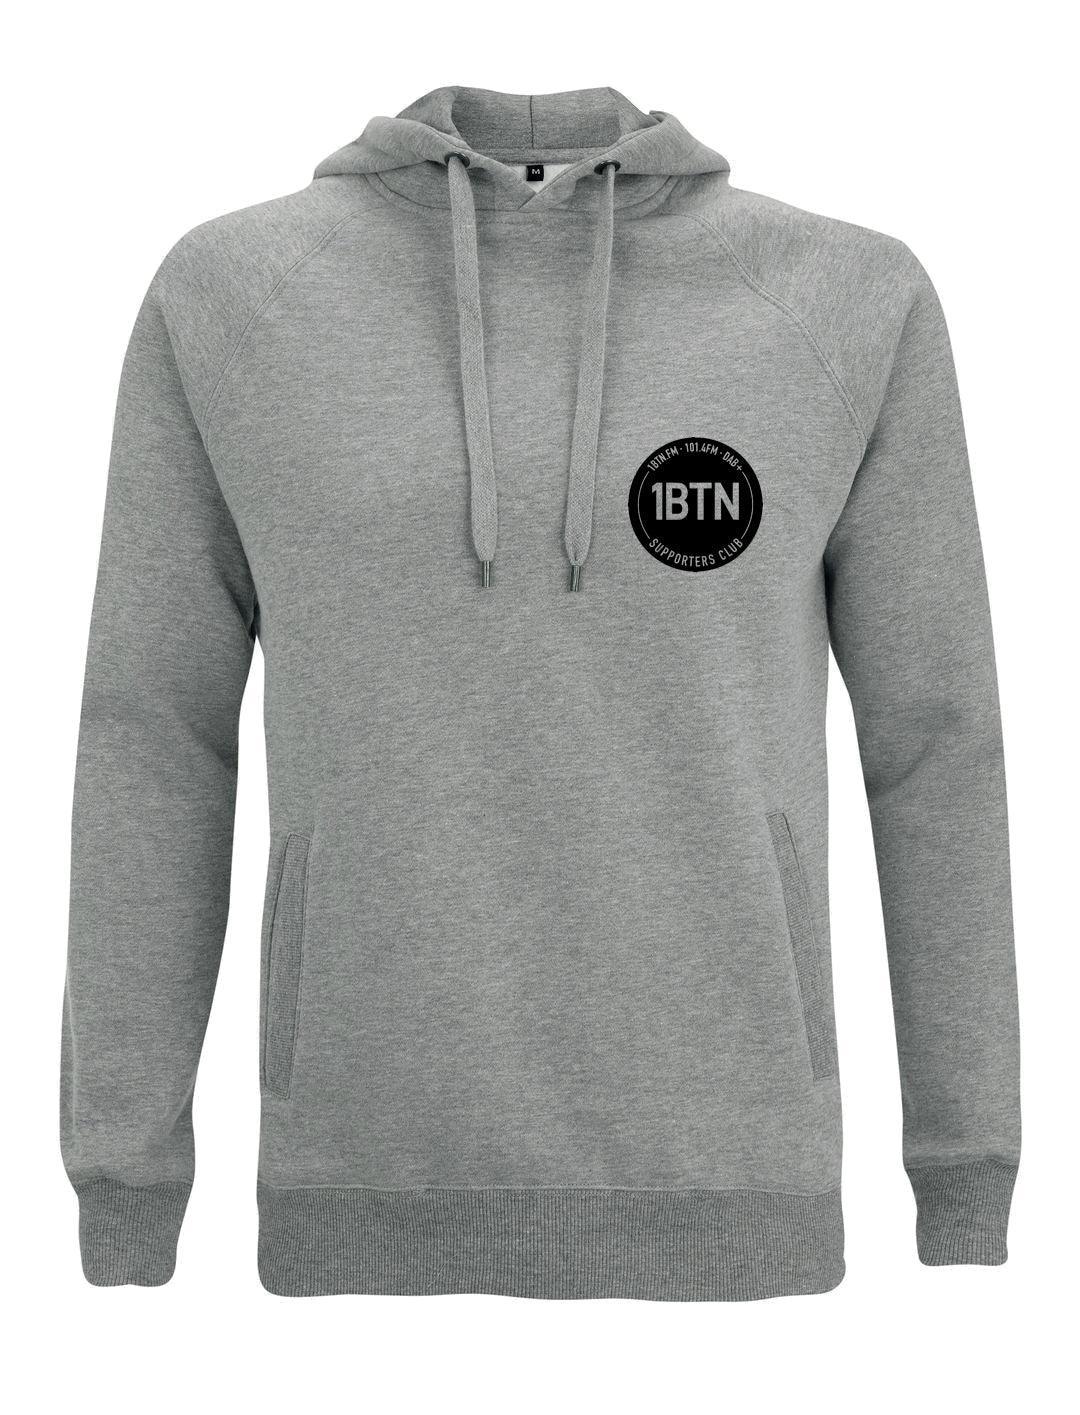 1BTN SUPPORTERS CLUB CHEST LOGO: Hoodie Official Merchandise of 1BTN.FM (5 Colour Options) - SOUND IS COLOUR